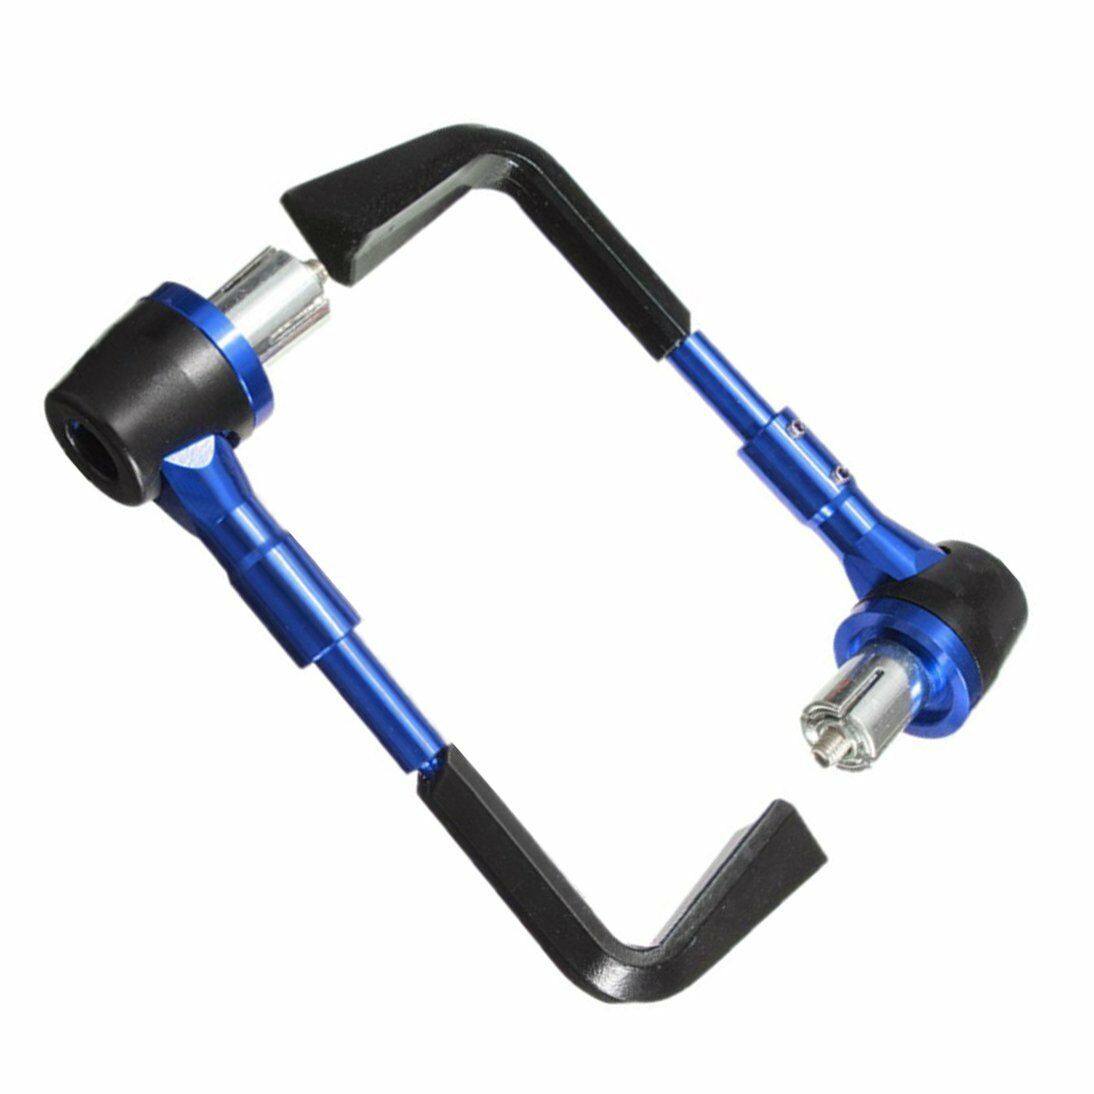 7/8"CNC Brake Clutch Lever Protector Protection Hand Guard For Motorcycle AU - TDRMOTO